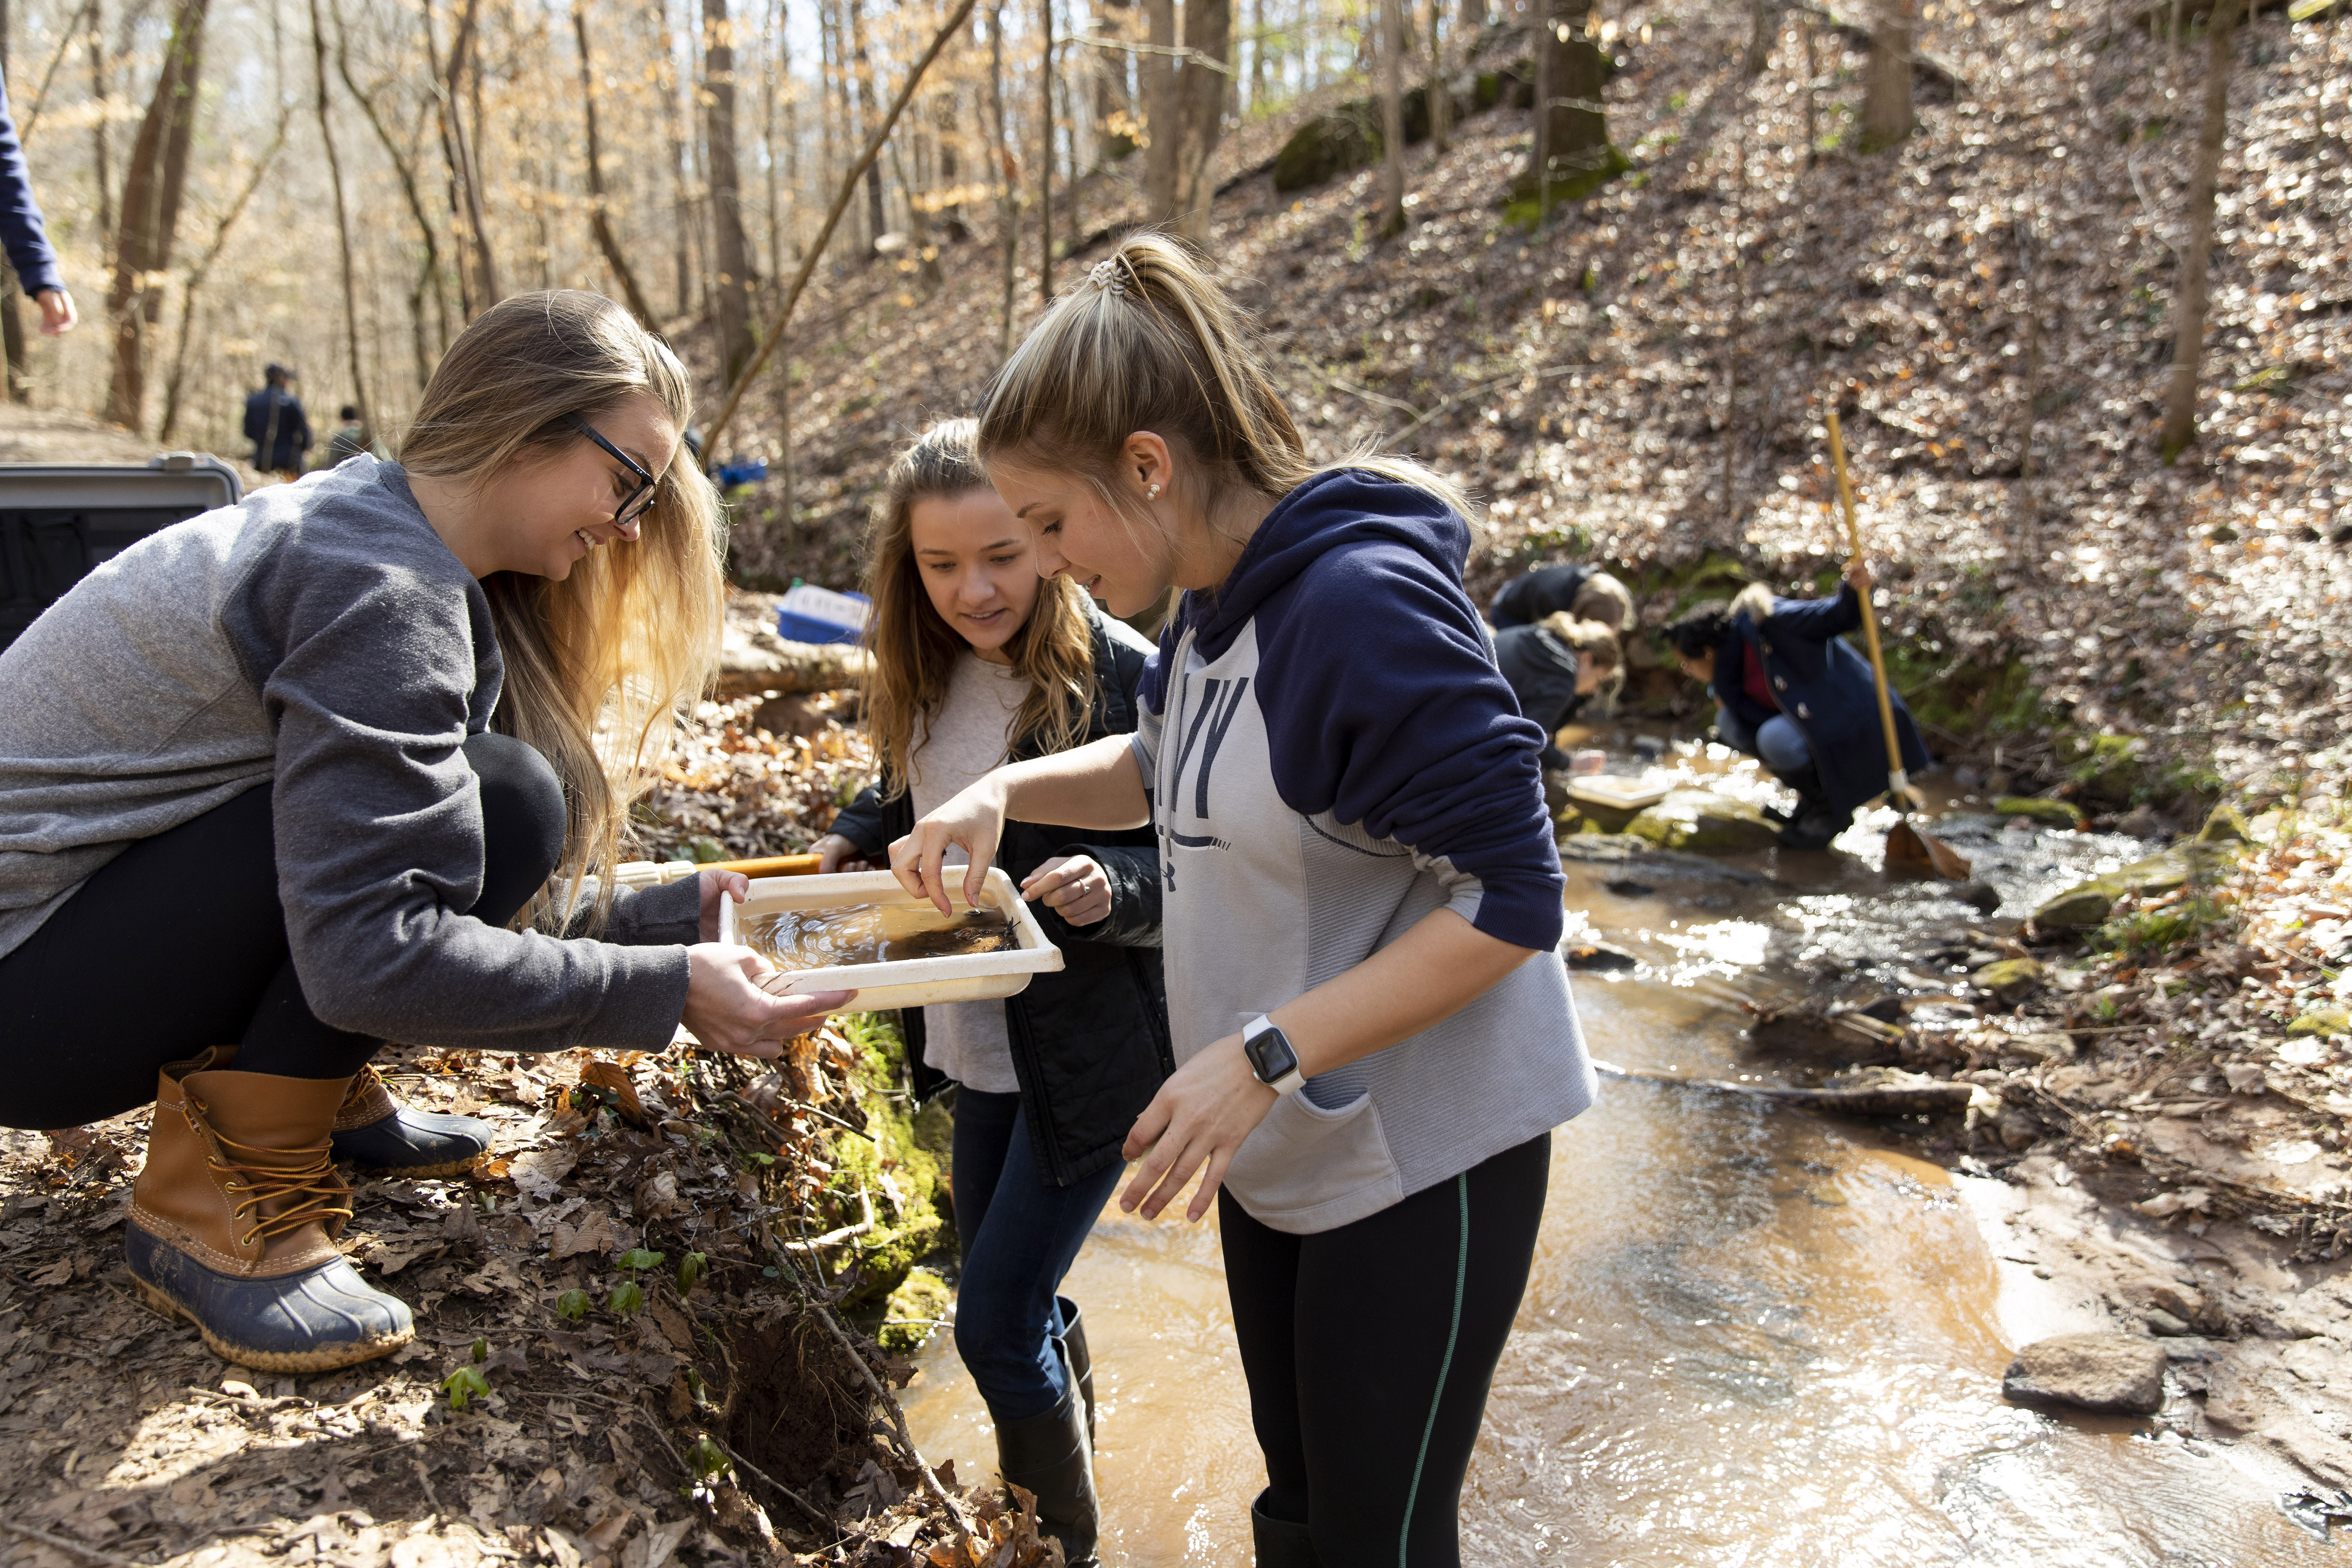 (L-R) Undergraduates Nicole Jackson, Jenna Blanchard, and Cheyenne Galloway look for small animals and bugs in a sampling tray as they sample as part of their Stream Ecology Lab in a stream off the orange trail at the State Botanical Gardens.